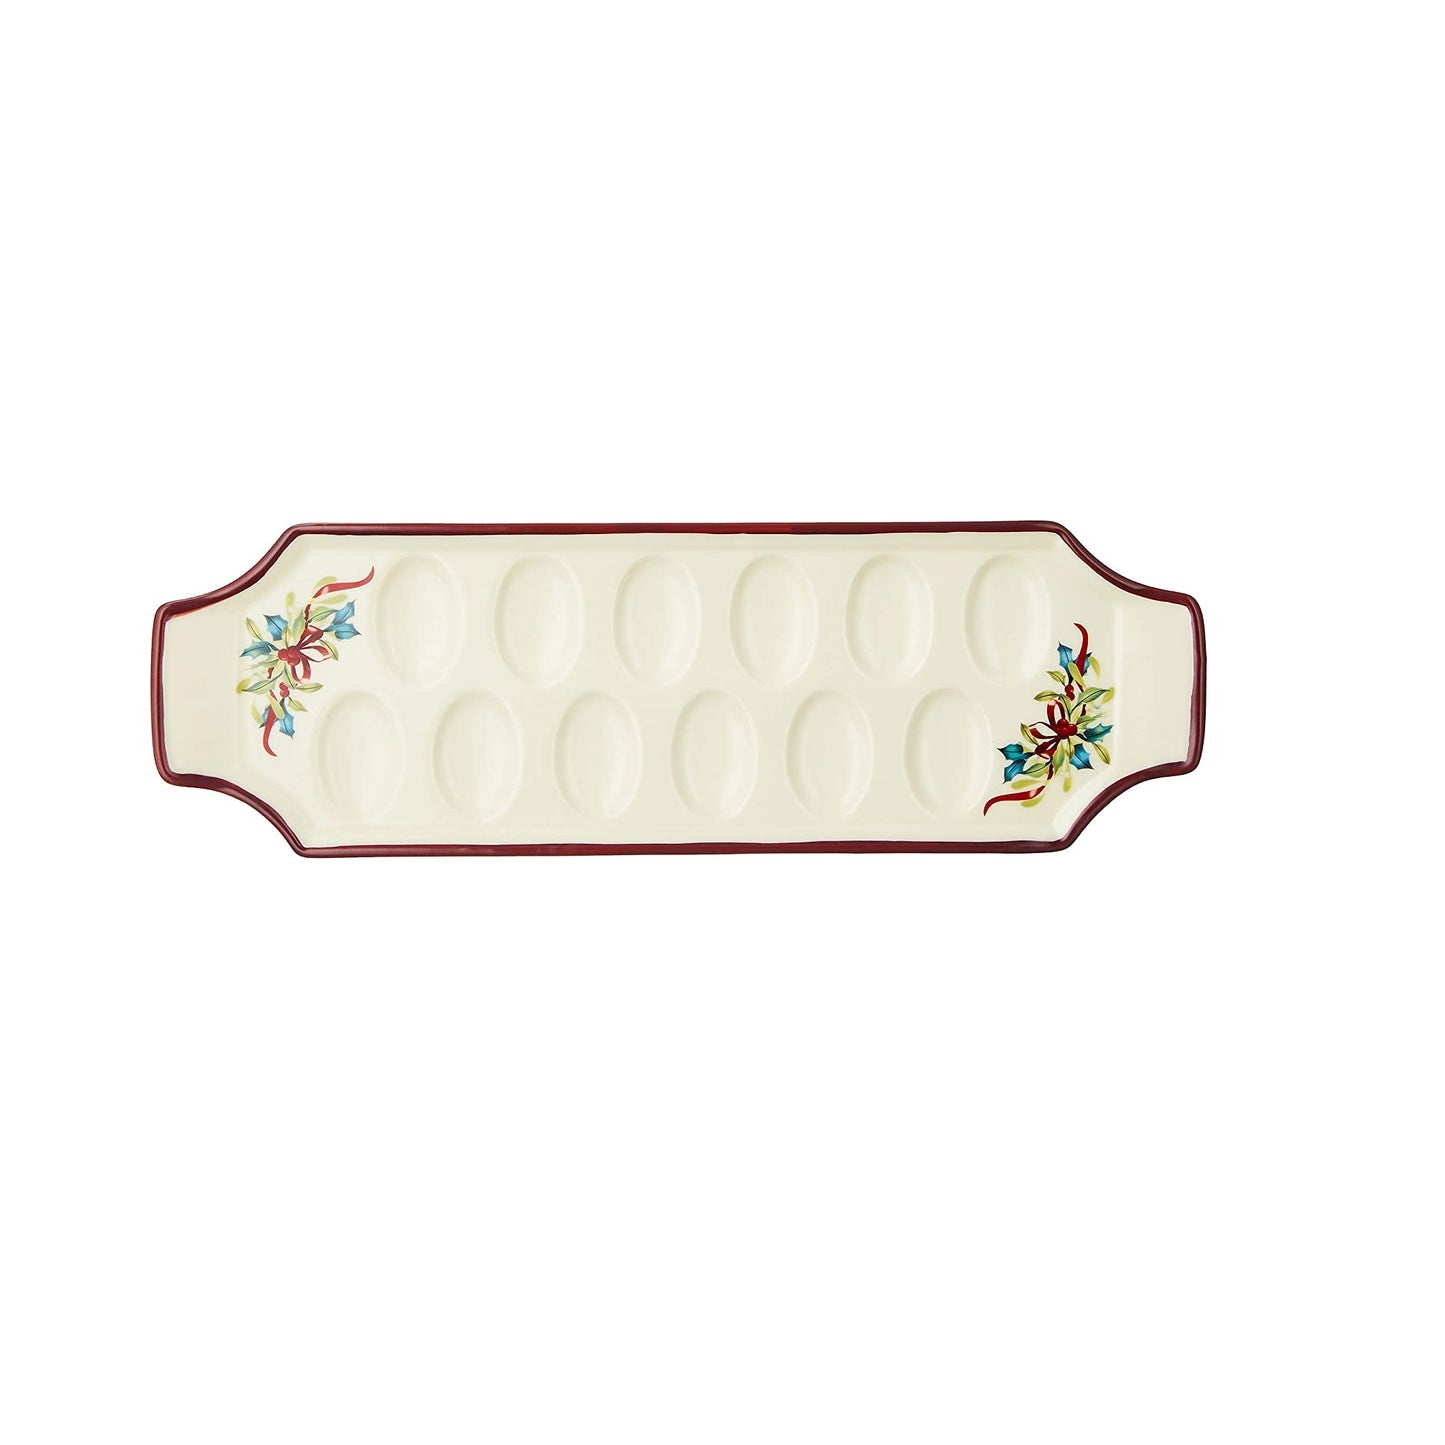 Winter Greetings™ Deviled Egg Tray by Lenox